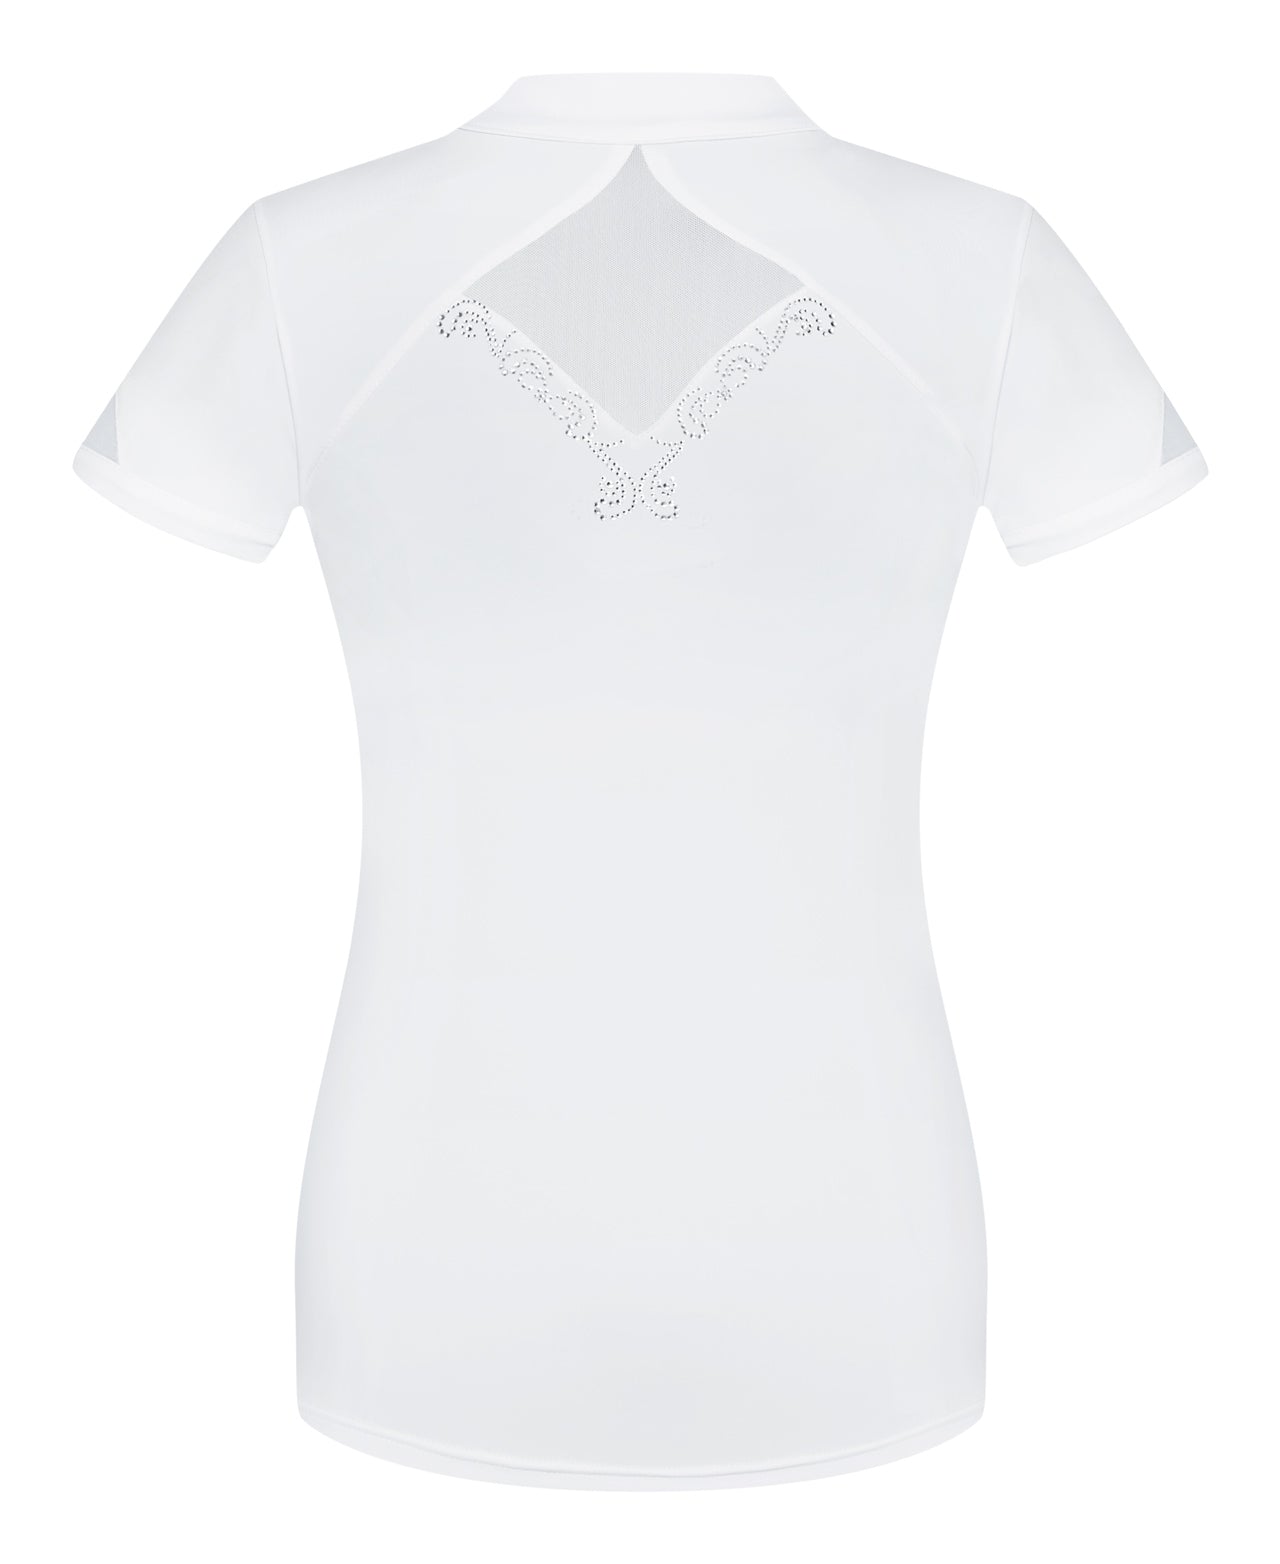 Ladies competition shirt with crystal decoration